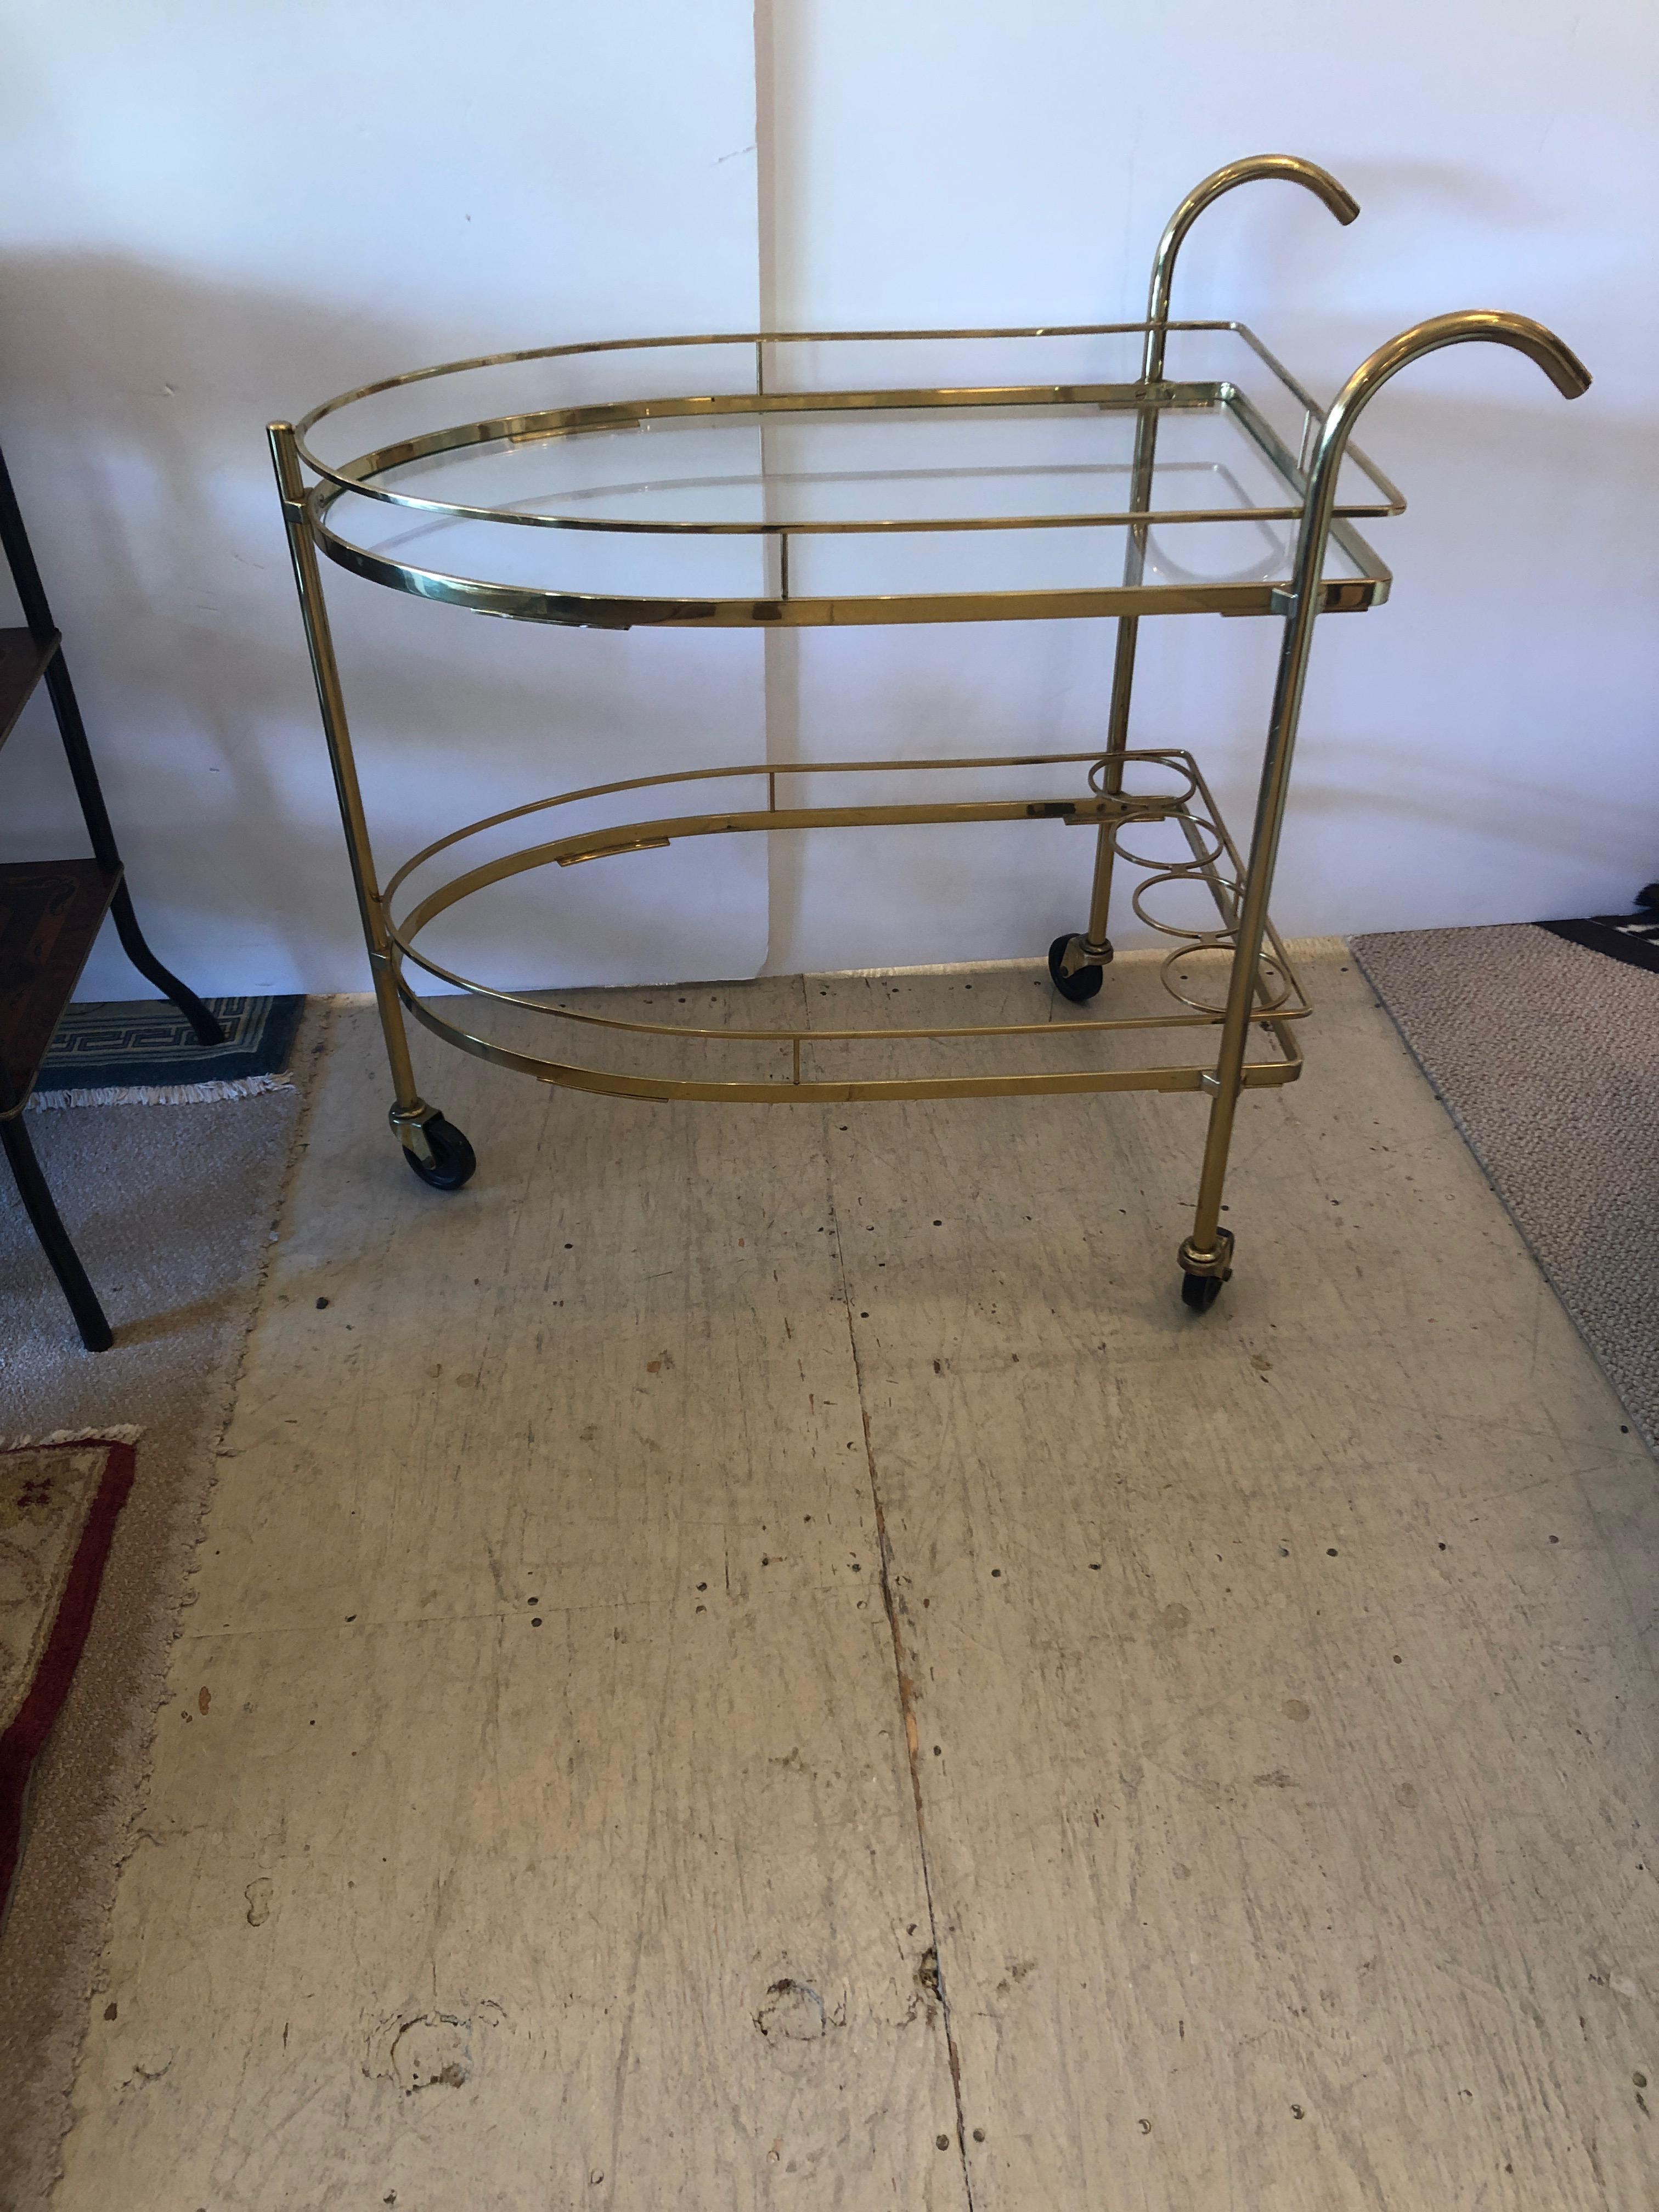 Schnazzy brass and glass bar cart in an unusual arch shape, having 2 tiers and cane like handles. Lower tier has new glass and wine or bottle rack. Height to top tier 29.